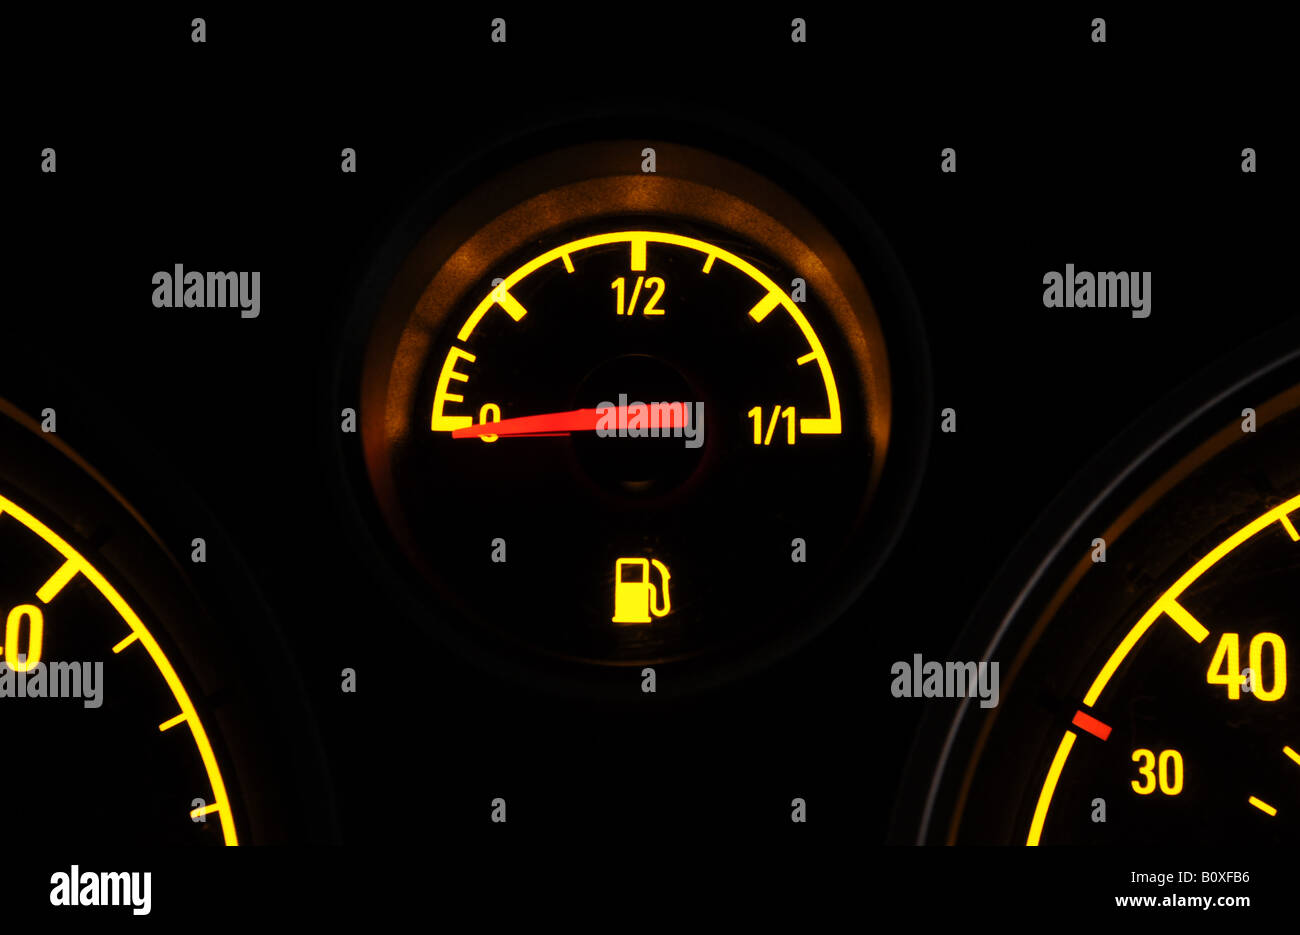 A BRITISH CAR FUEL GAUGE SHOWING LOW FUEL WITH  WARNING LIGHT,UK. Stock Photo